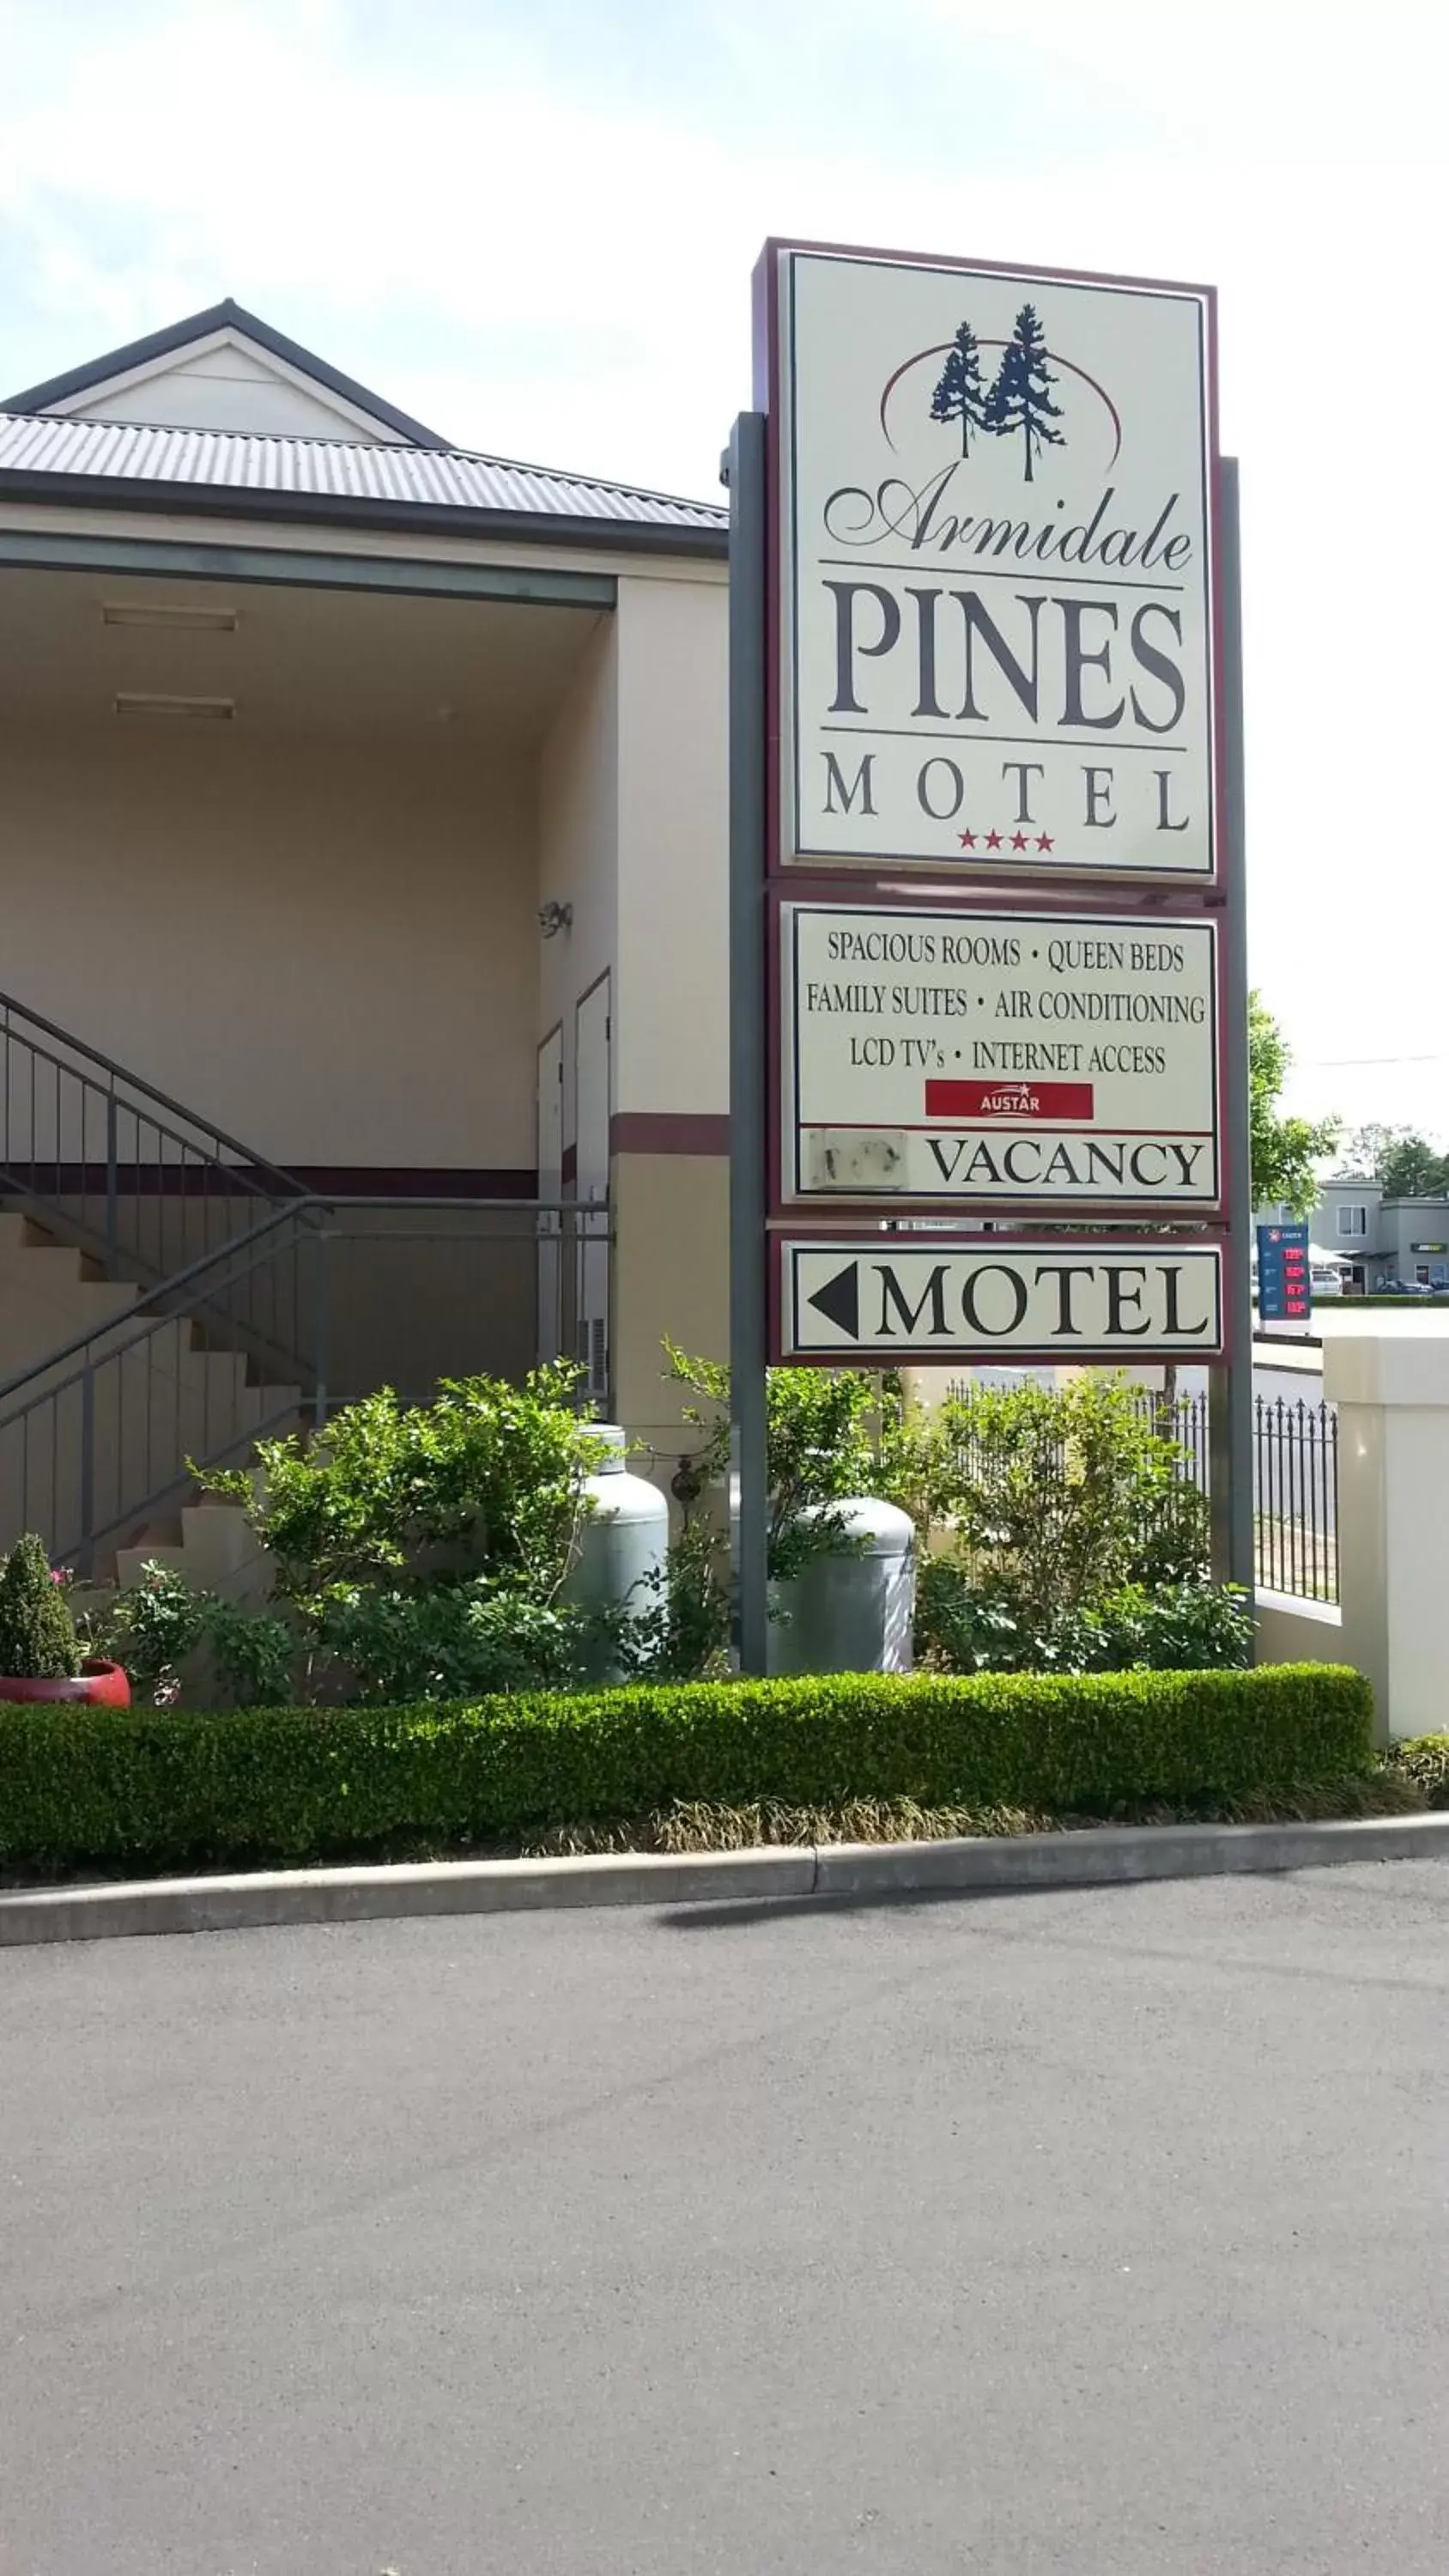 Property logo or sign, Property Building in Armidale Pines Motel